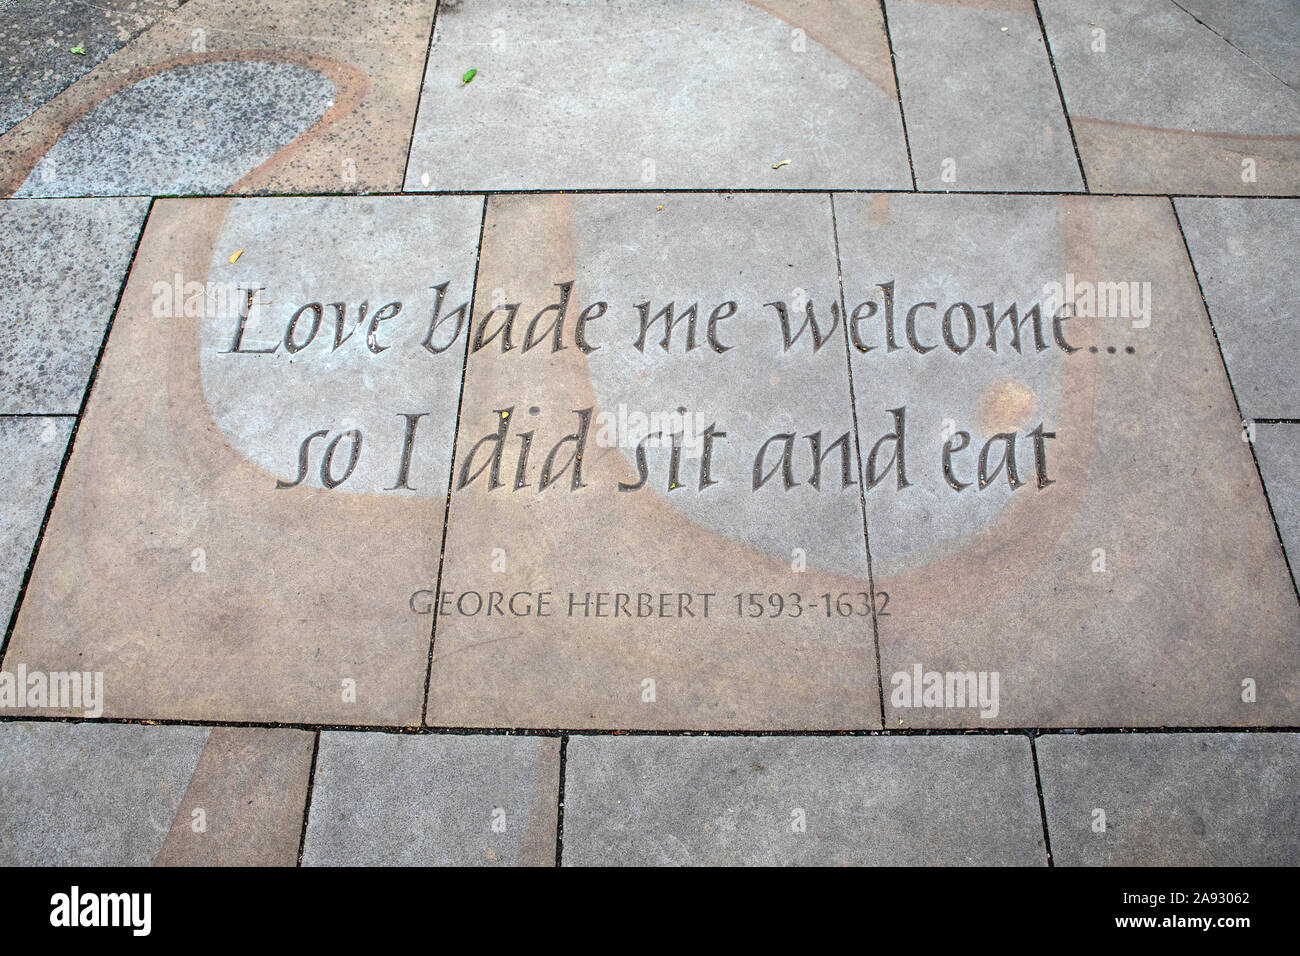 Exeter, UK - July 31st 2019: A quote in the grounds of Exeter Cathedral in Devon, by Welsh-born poet and priest George Herbert. Stock Photo